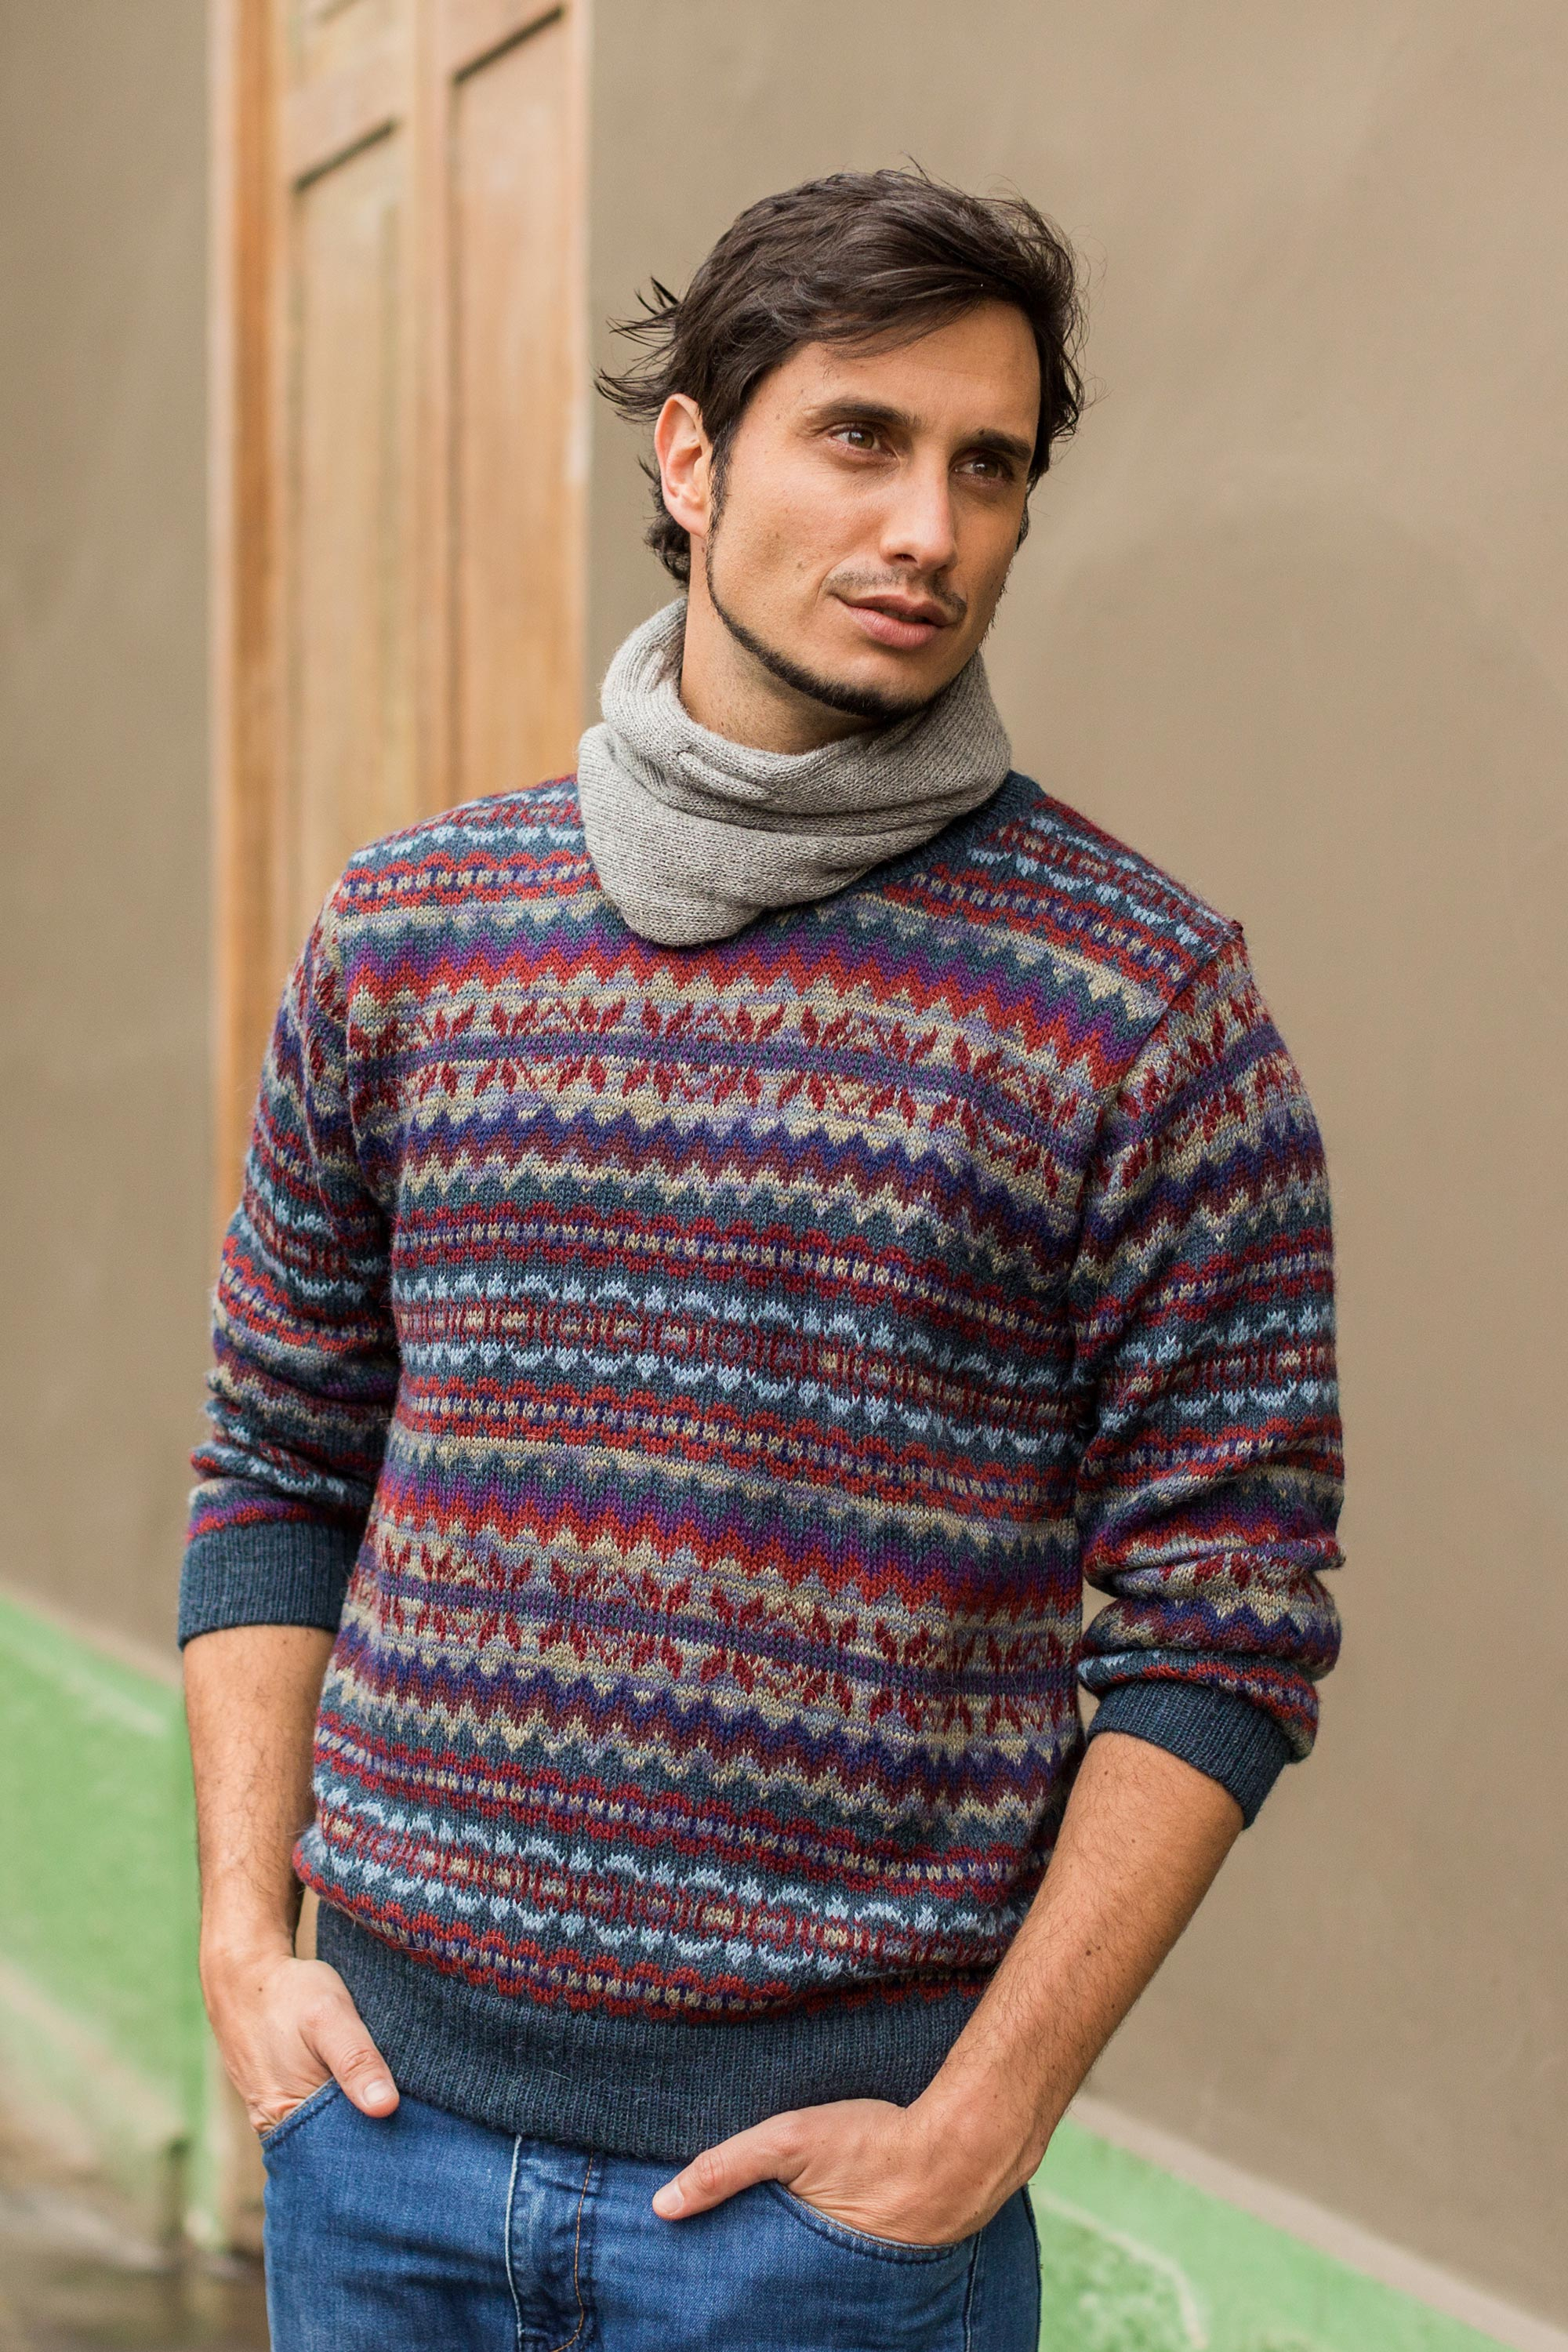 Patterned Blue and Burgundy Alpaca Men's Knit Sweater - Colca Canyon ...